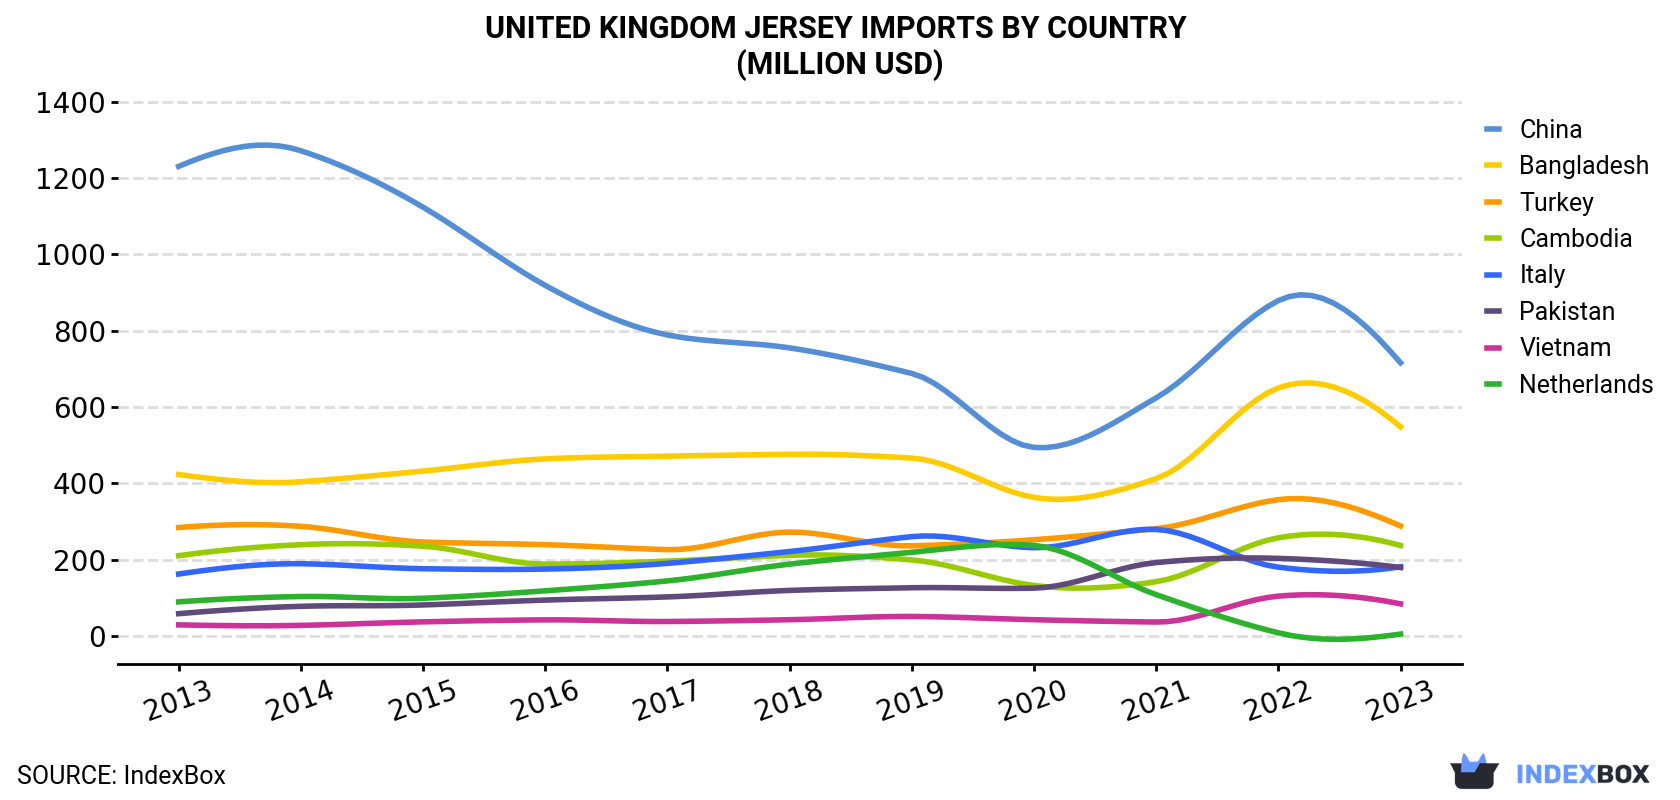 United Kingdom Jersey Imports By Country (Million USD)